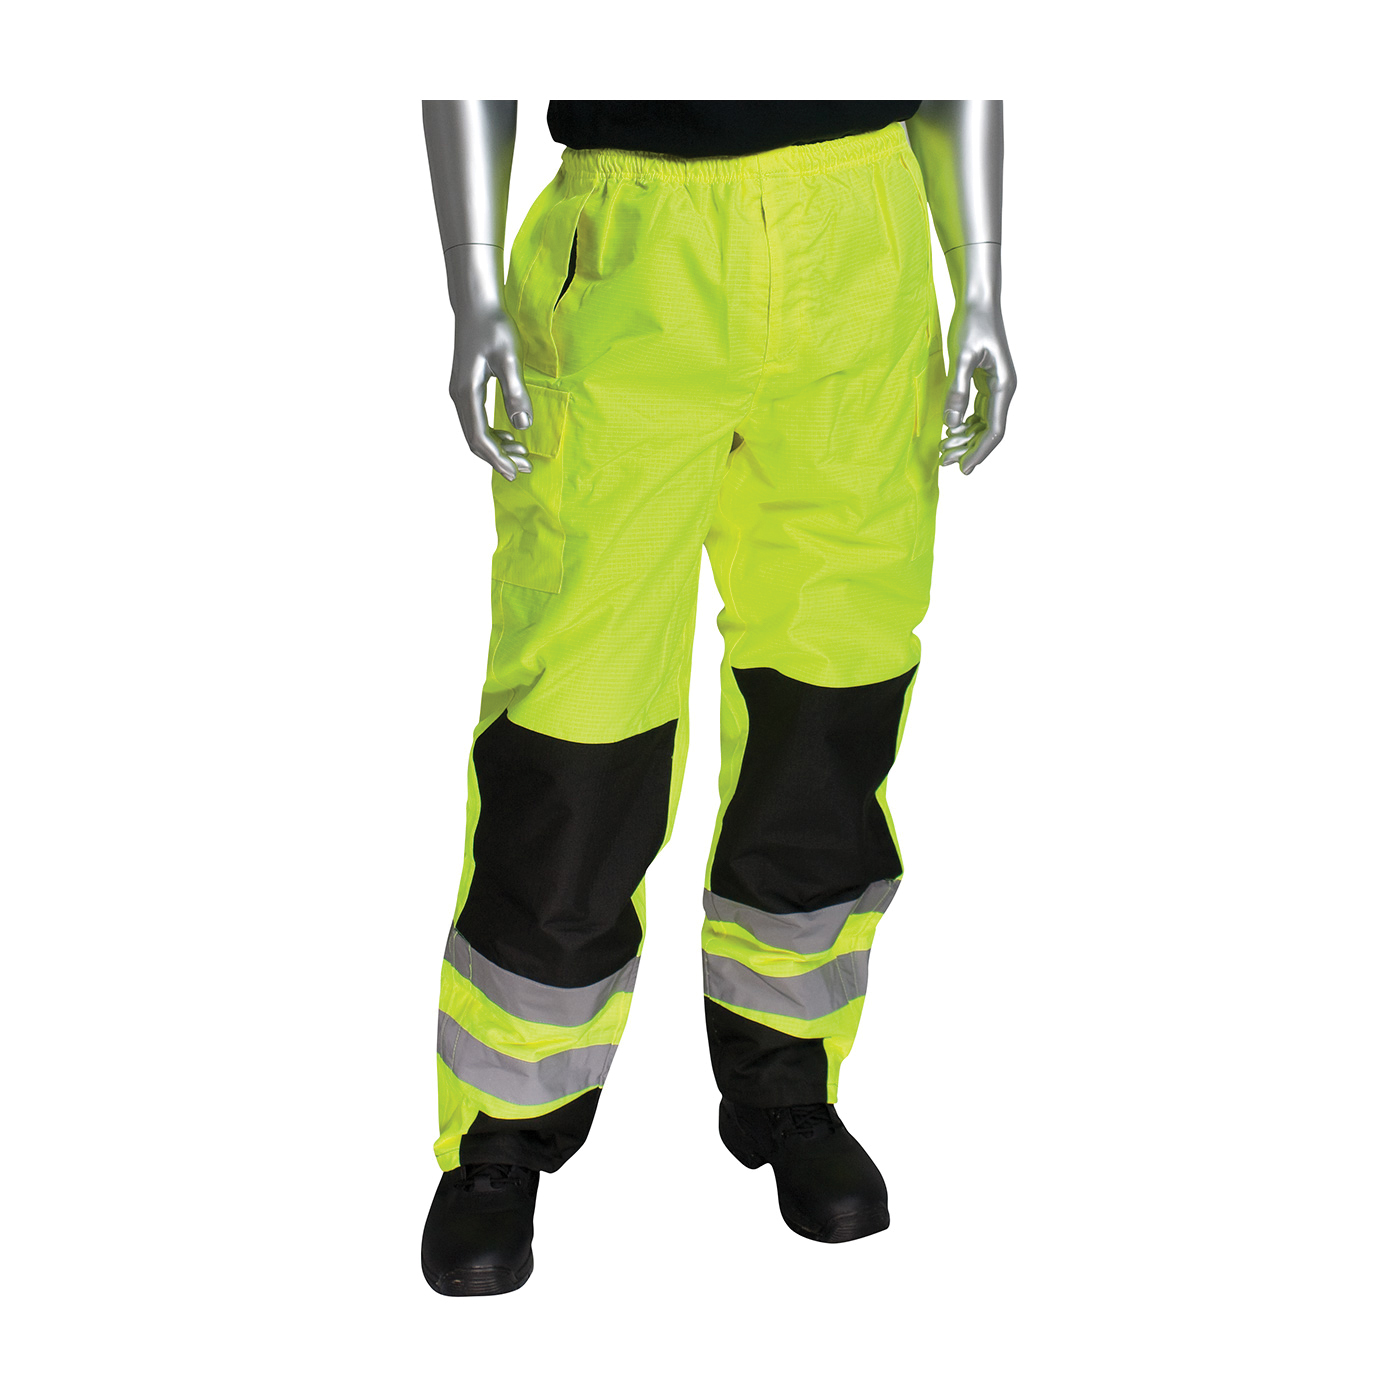 PIP® 318-1771-LY/S Non-Breathable Ripstop Reinforced Hi-Visibility Overpant, Hi-Viz Lime Yellow, Polyester